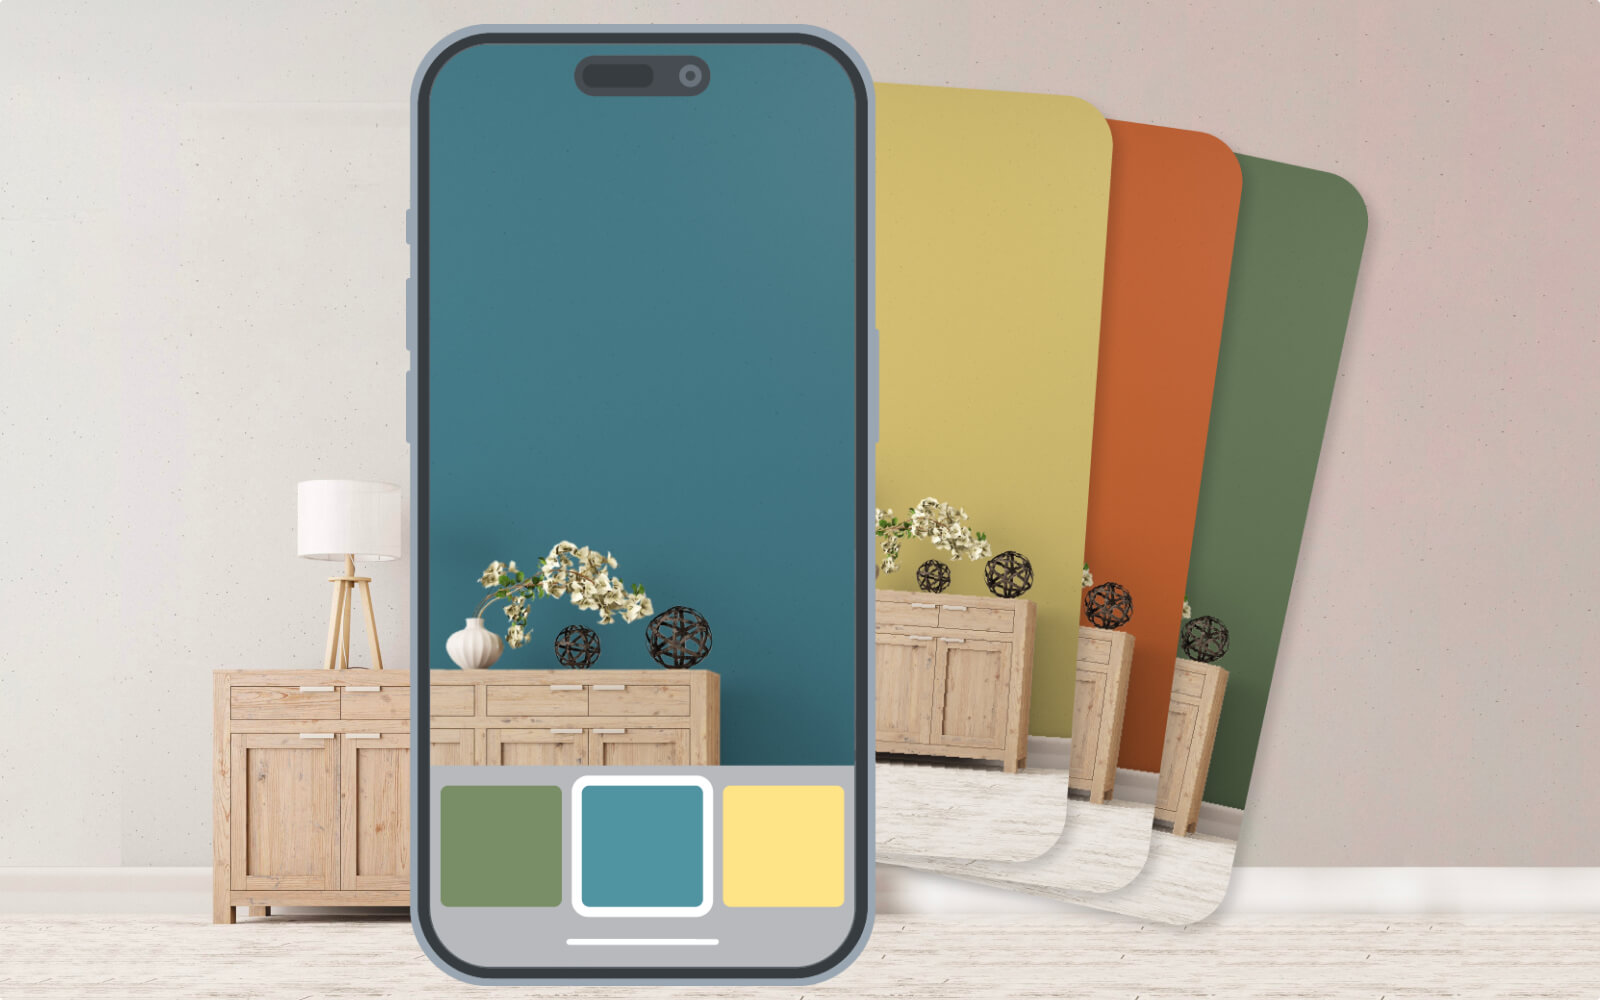 VIRTUALLY PAINT YOUR SPACE